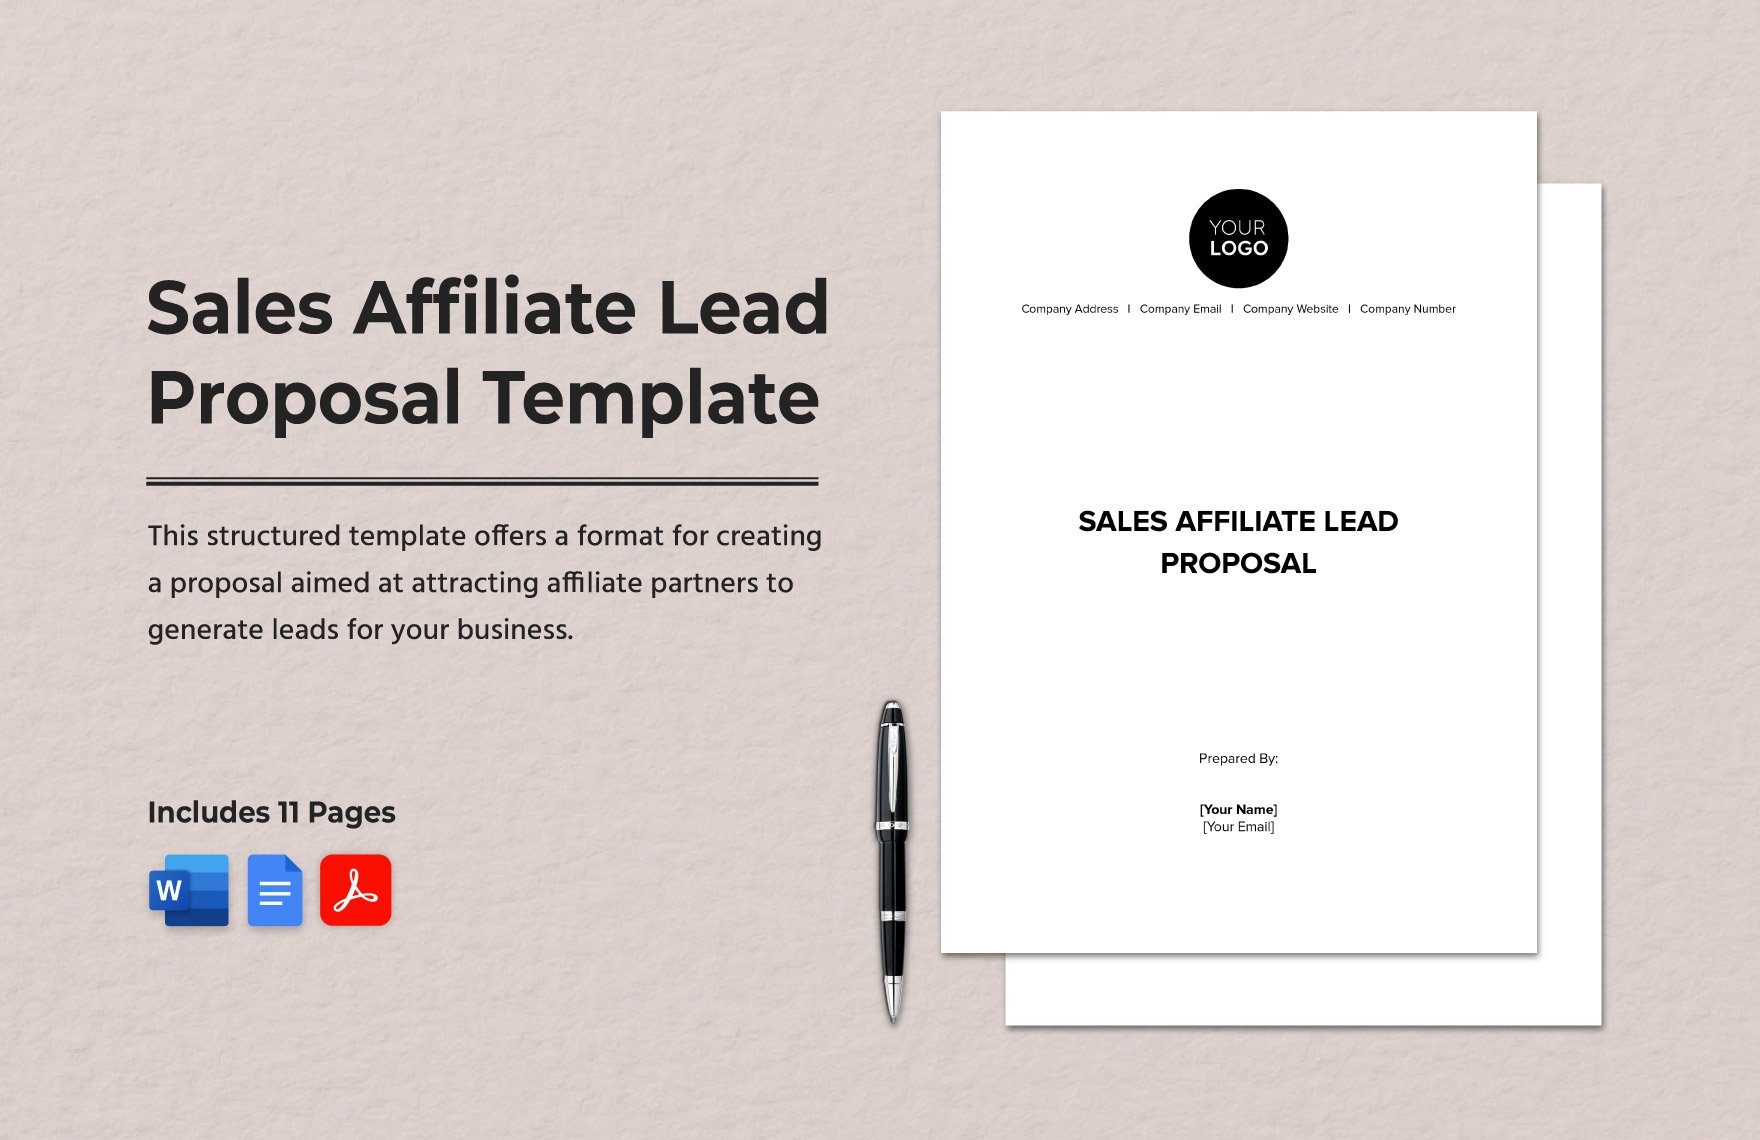 Sales Affiliate Lead Proposal Template in Word, Google Docs, PDF